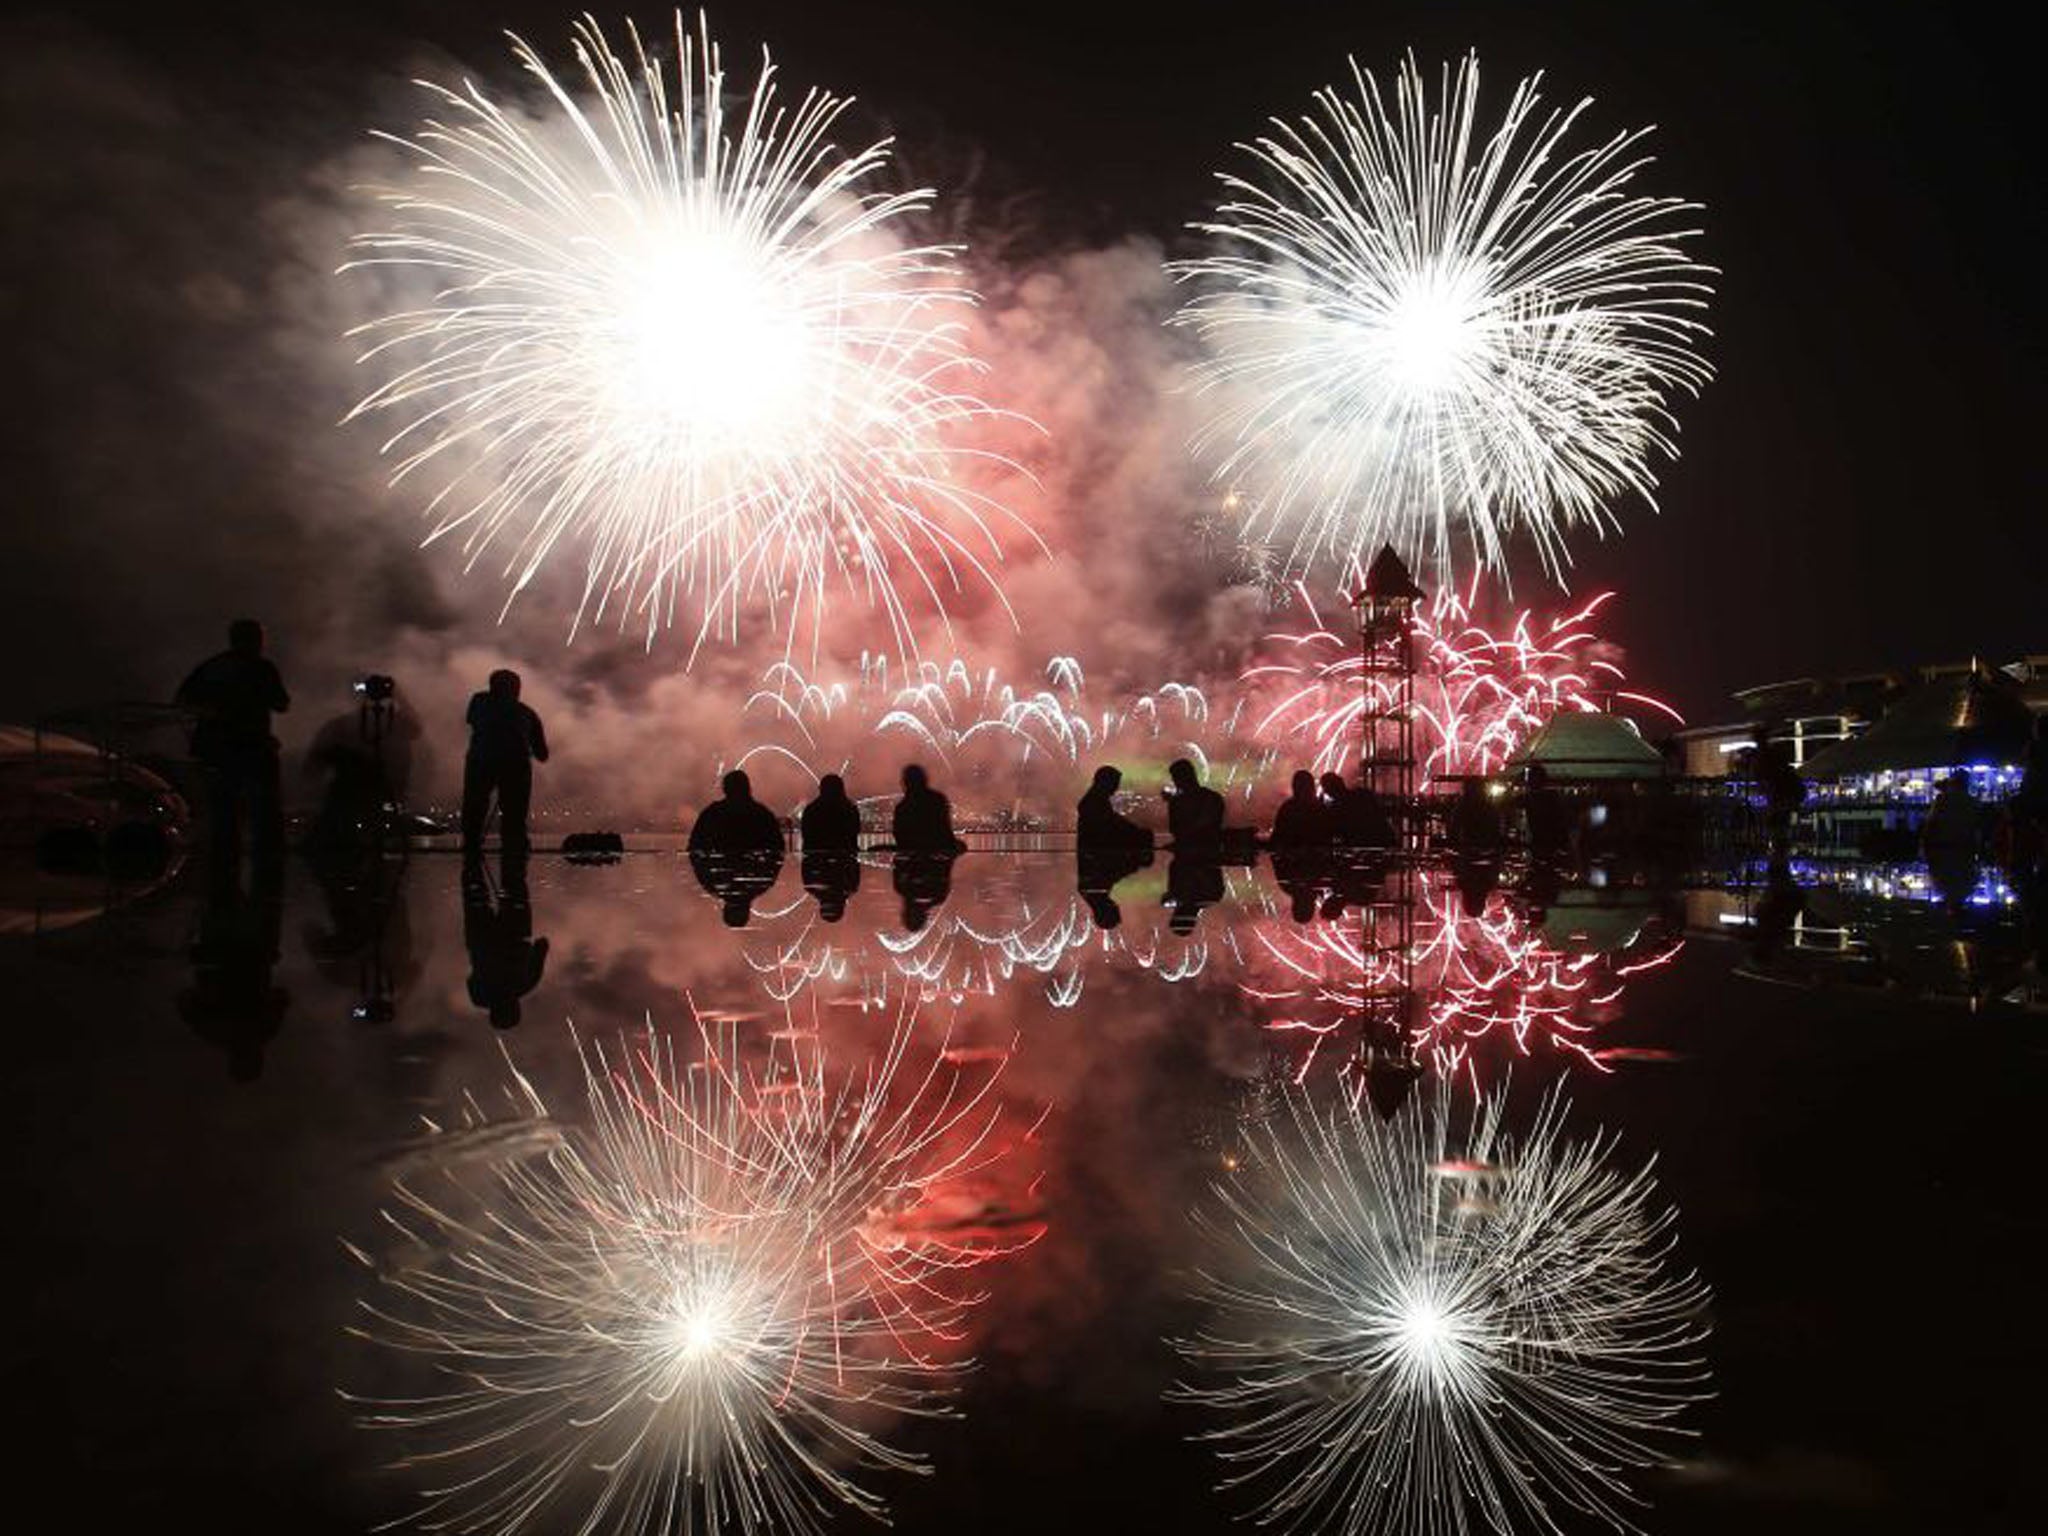 15 September 2013: People watch a fireworks display by team USA over the sky during the Putrajaya International Fireworks Competition outside Kuala Lumpur (Bazuki Muhammad/Reuters)